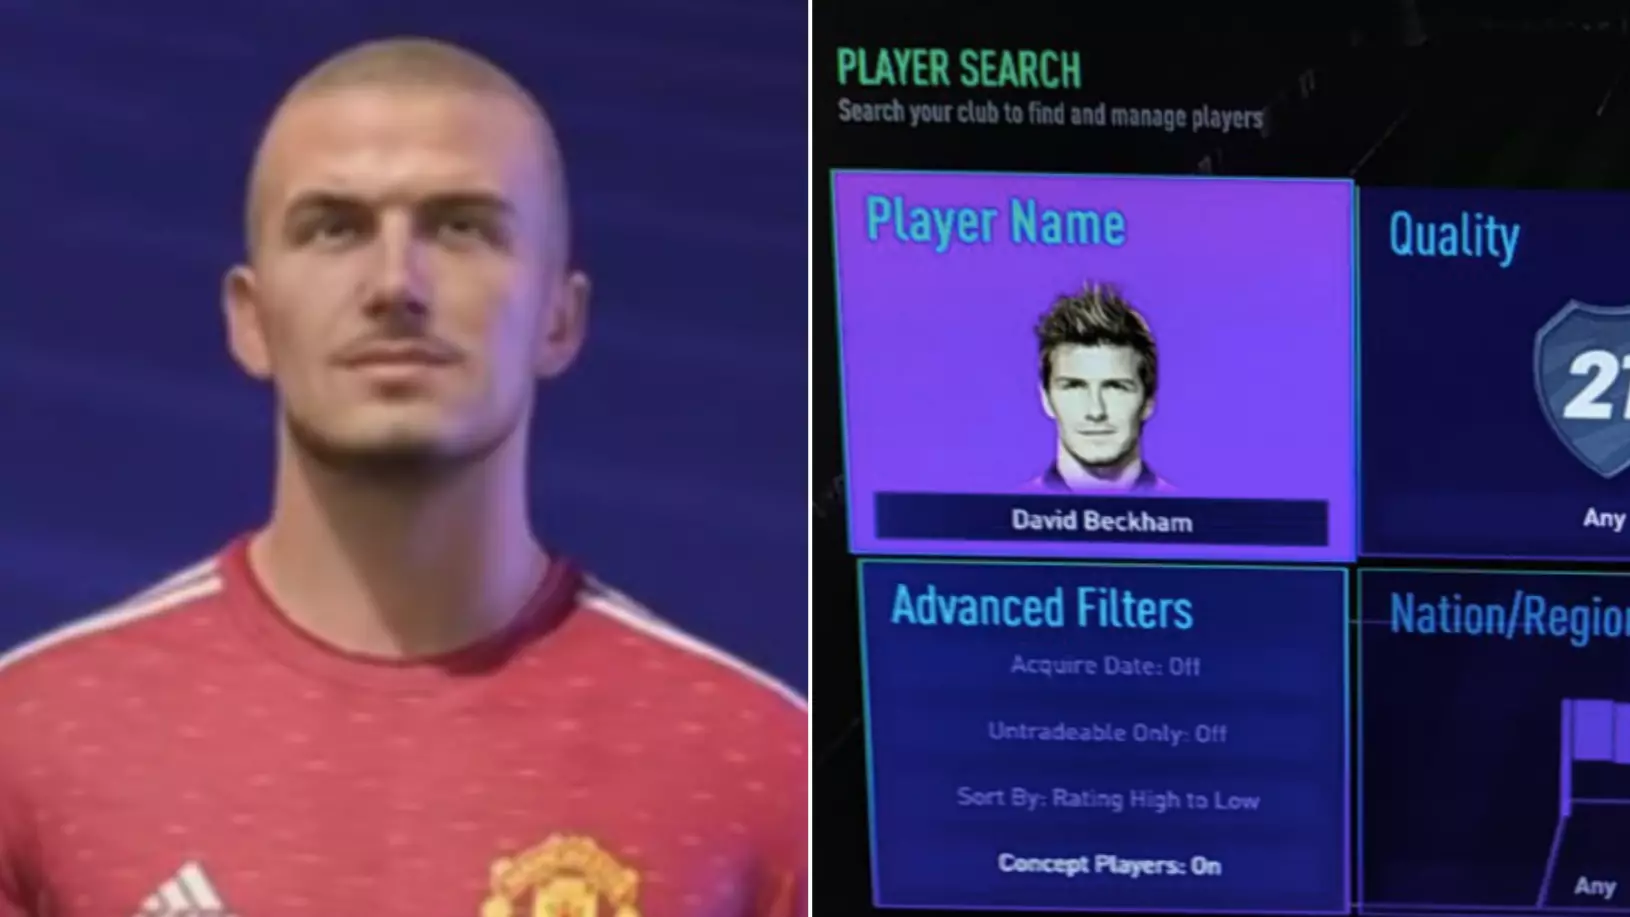 Leaked Screenshots Show Three Different Versions Of 'ICON' David Beckham In FIFA 21